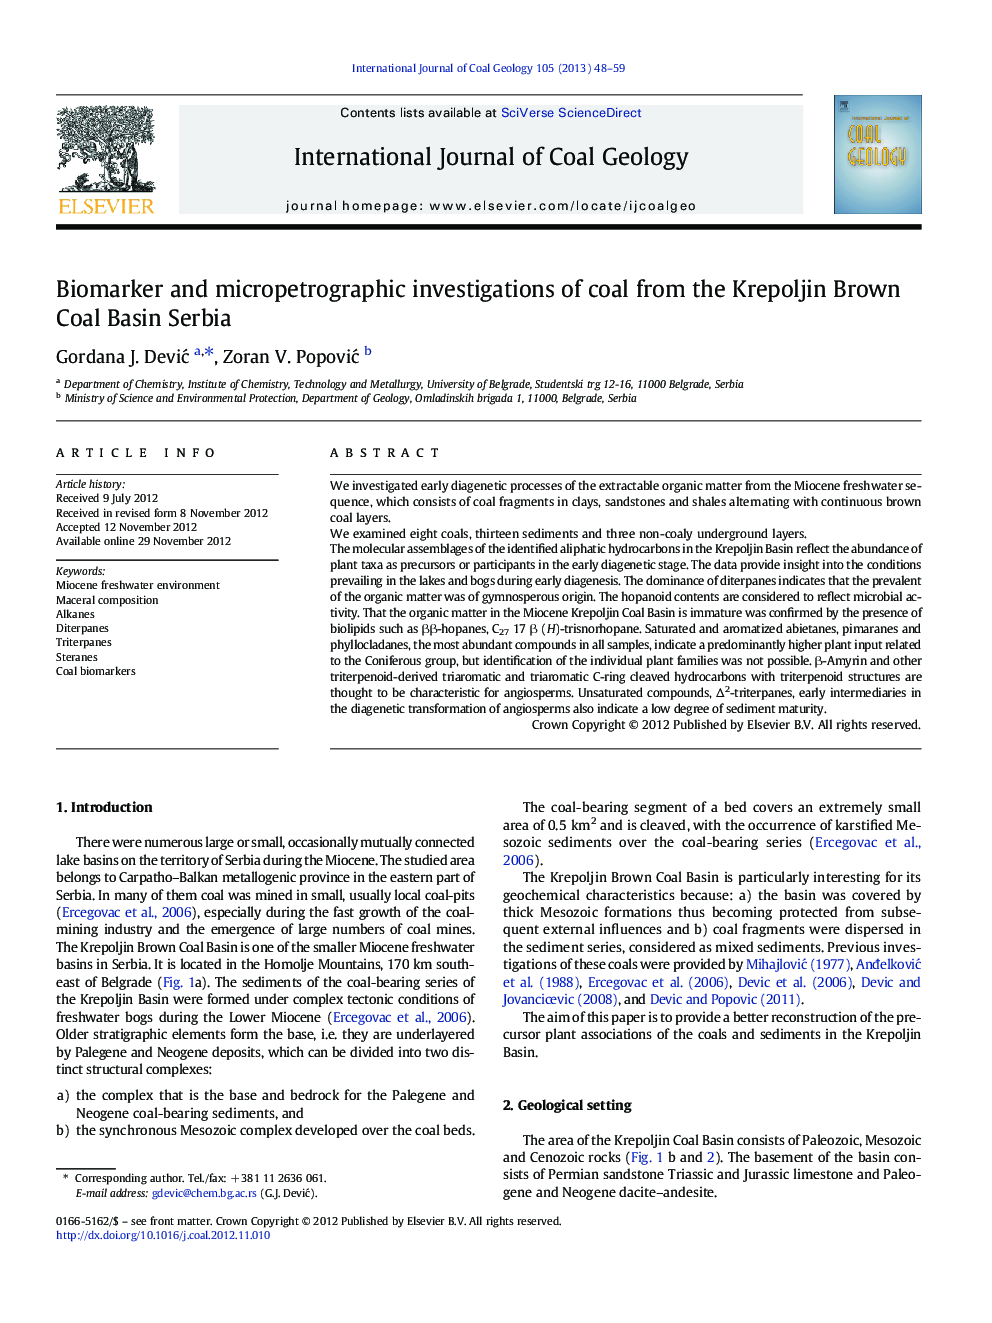 Biomarker and micropetrographic investigations of coal from the Krepoljin Brown Coal Basin Serbia